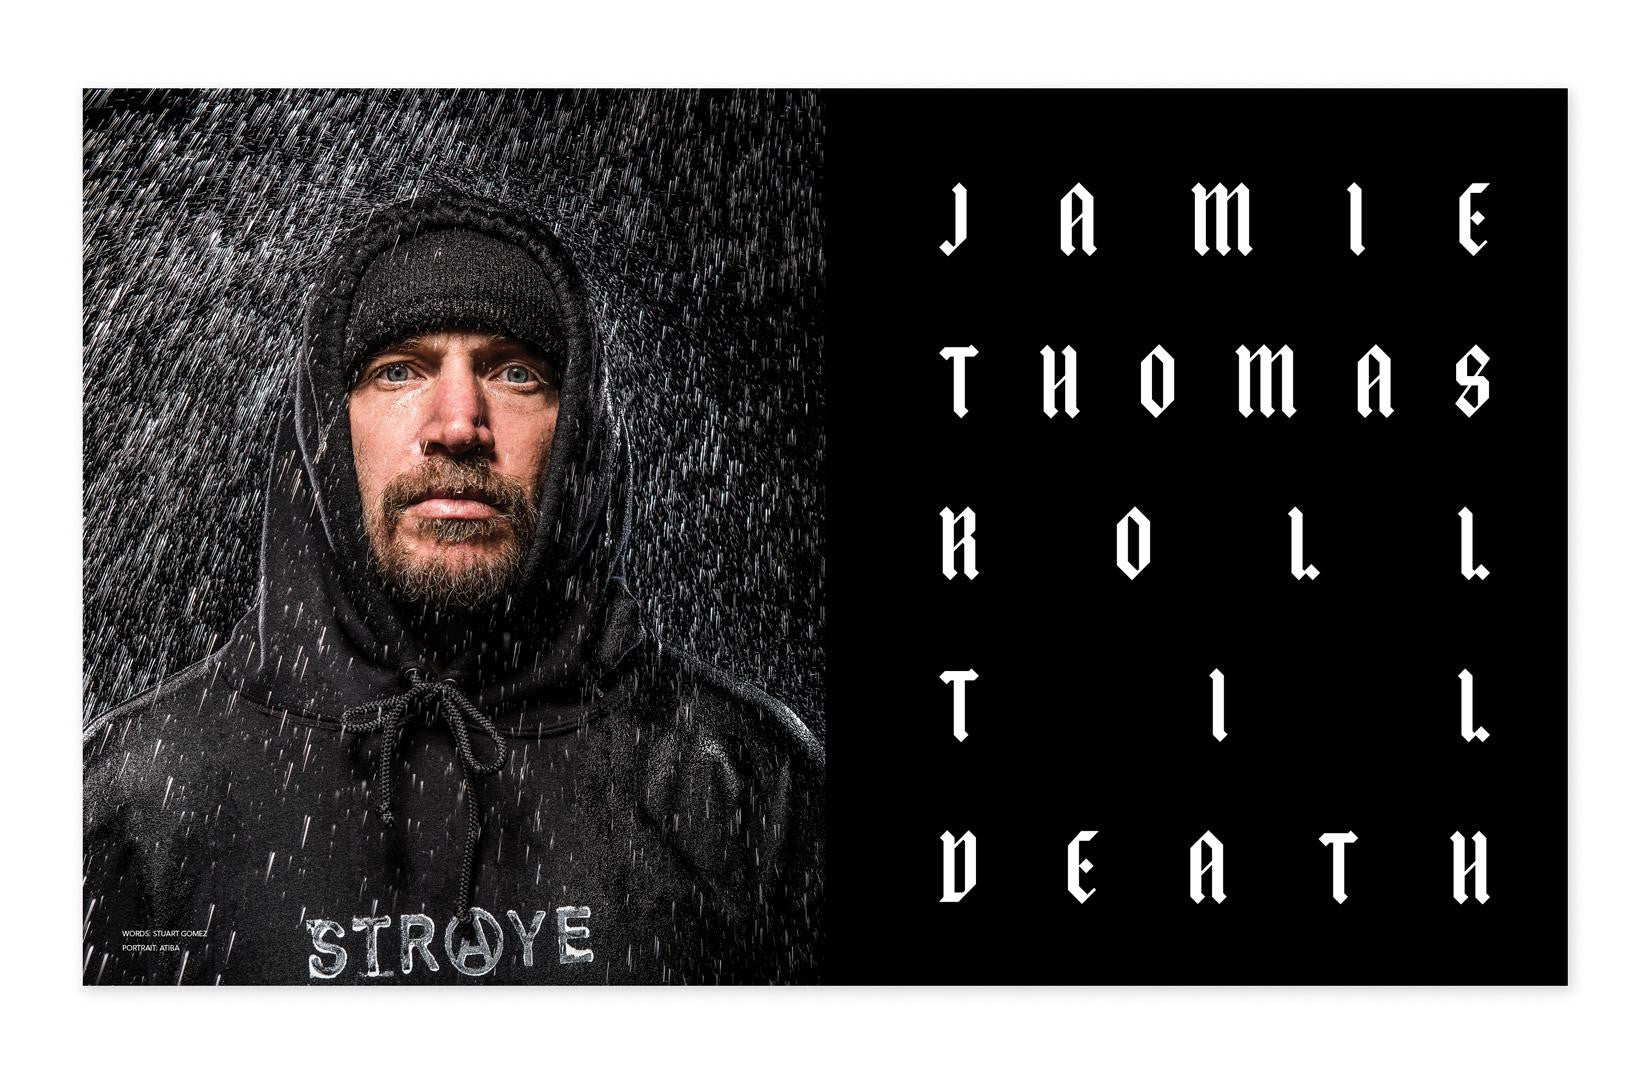 THE SKATEBOARD MAG: ROLL 'TIL DEATH JAMIE THOMAS INTERVIEW